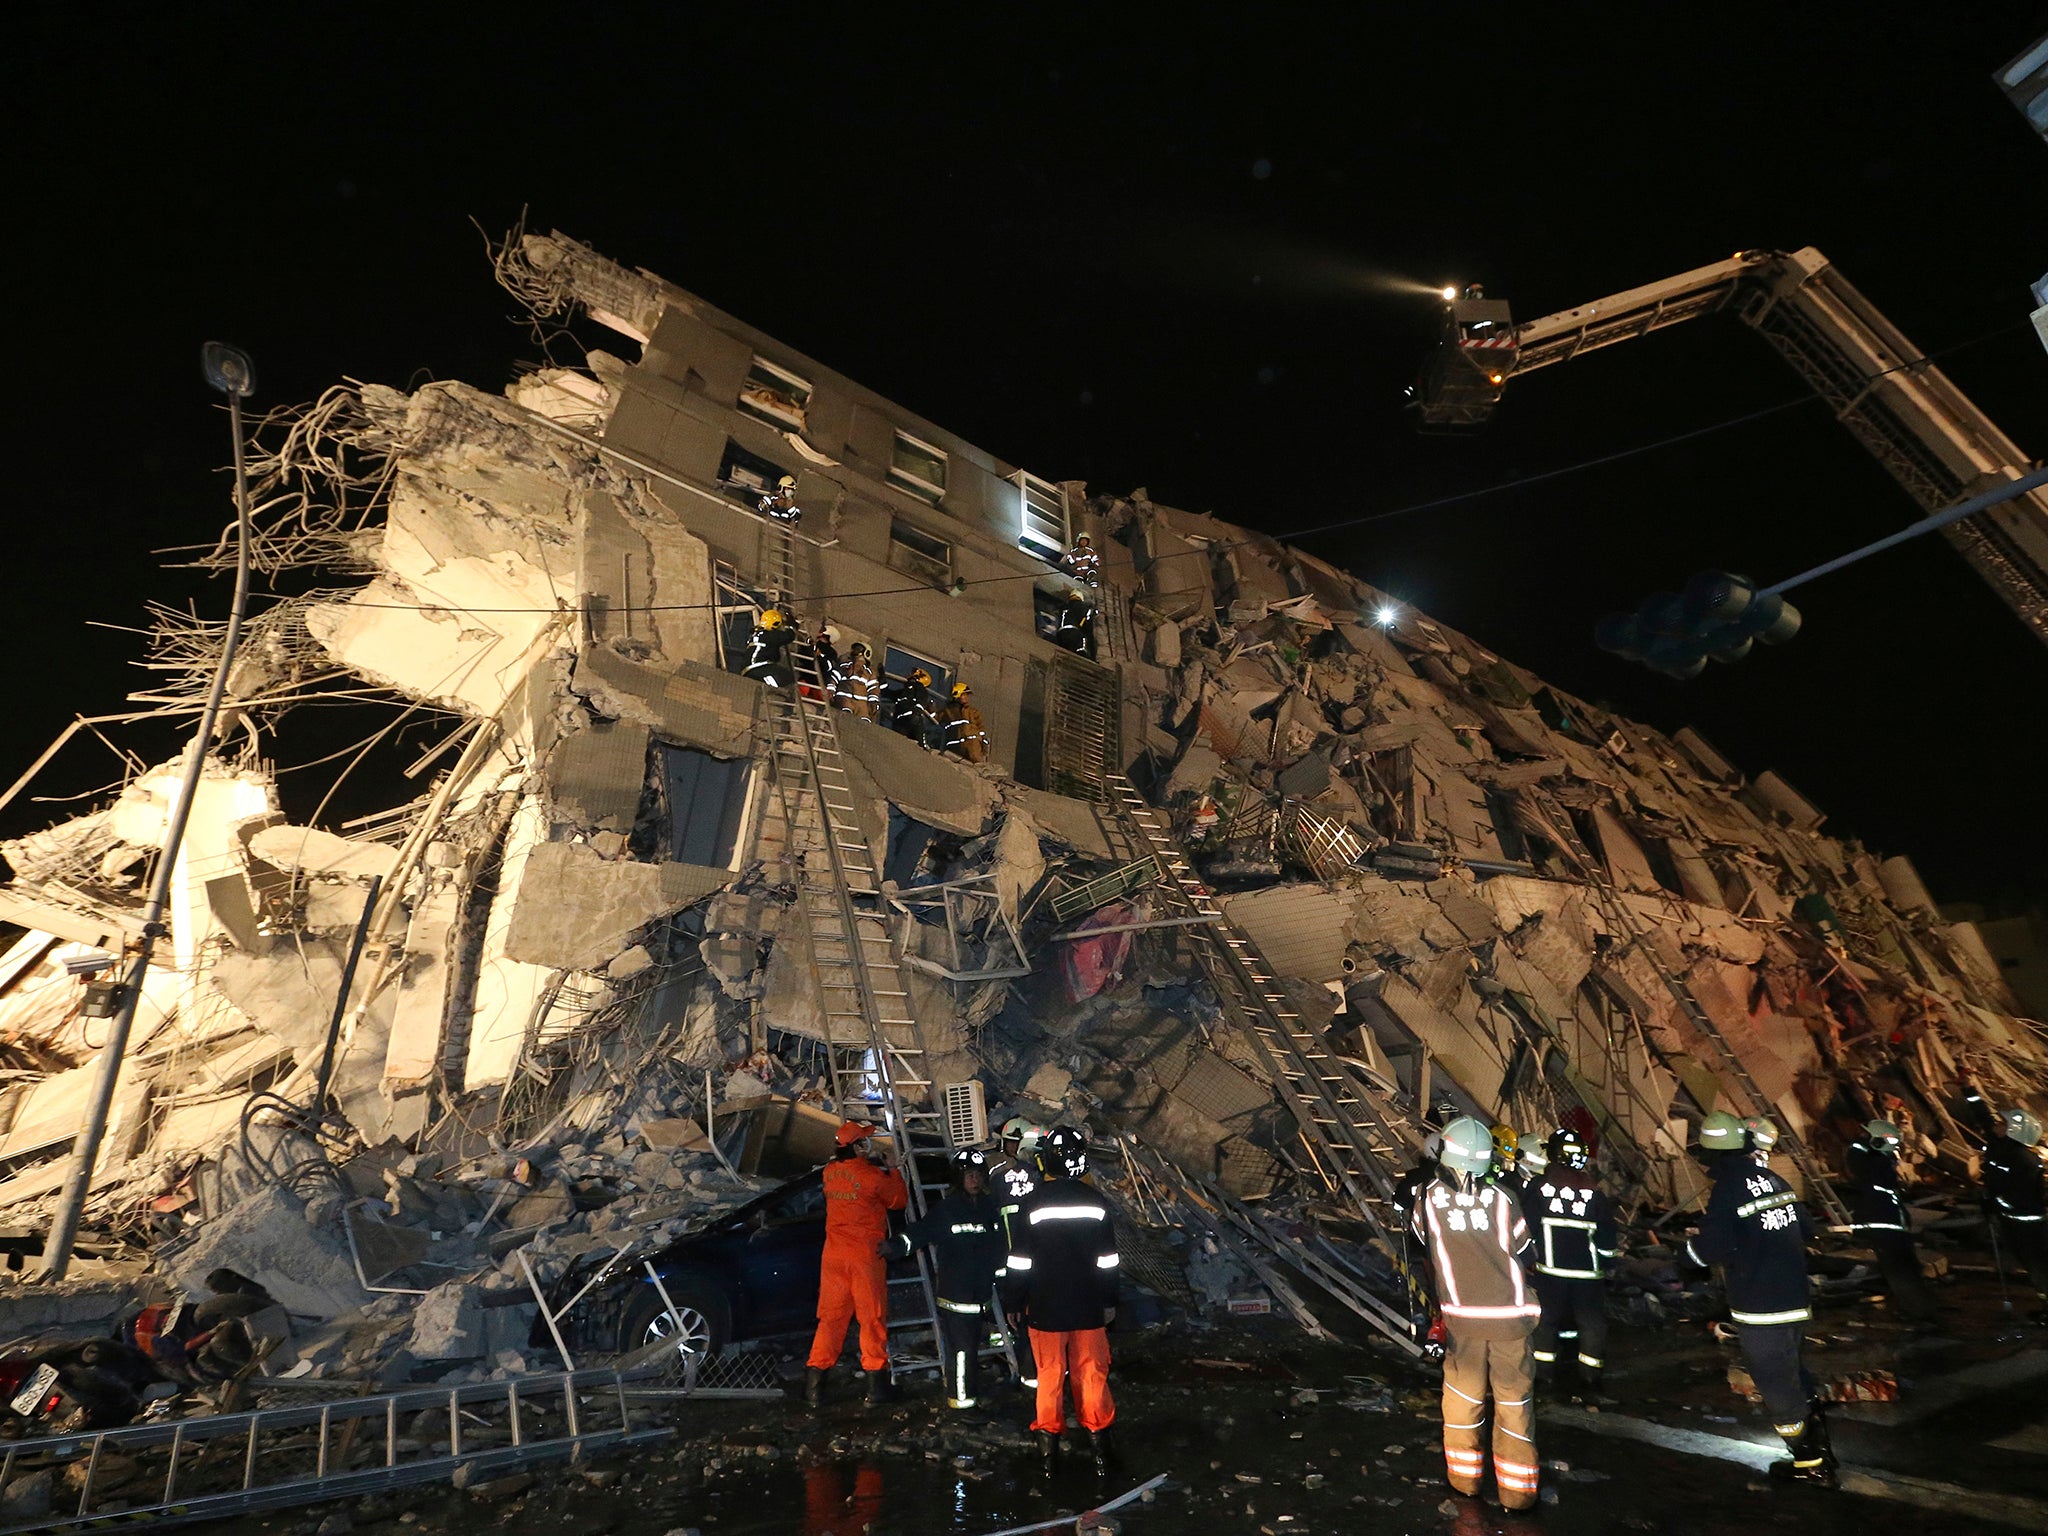 Rescue workers search a toppled building after an earthquake in Tainan, Taiwan